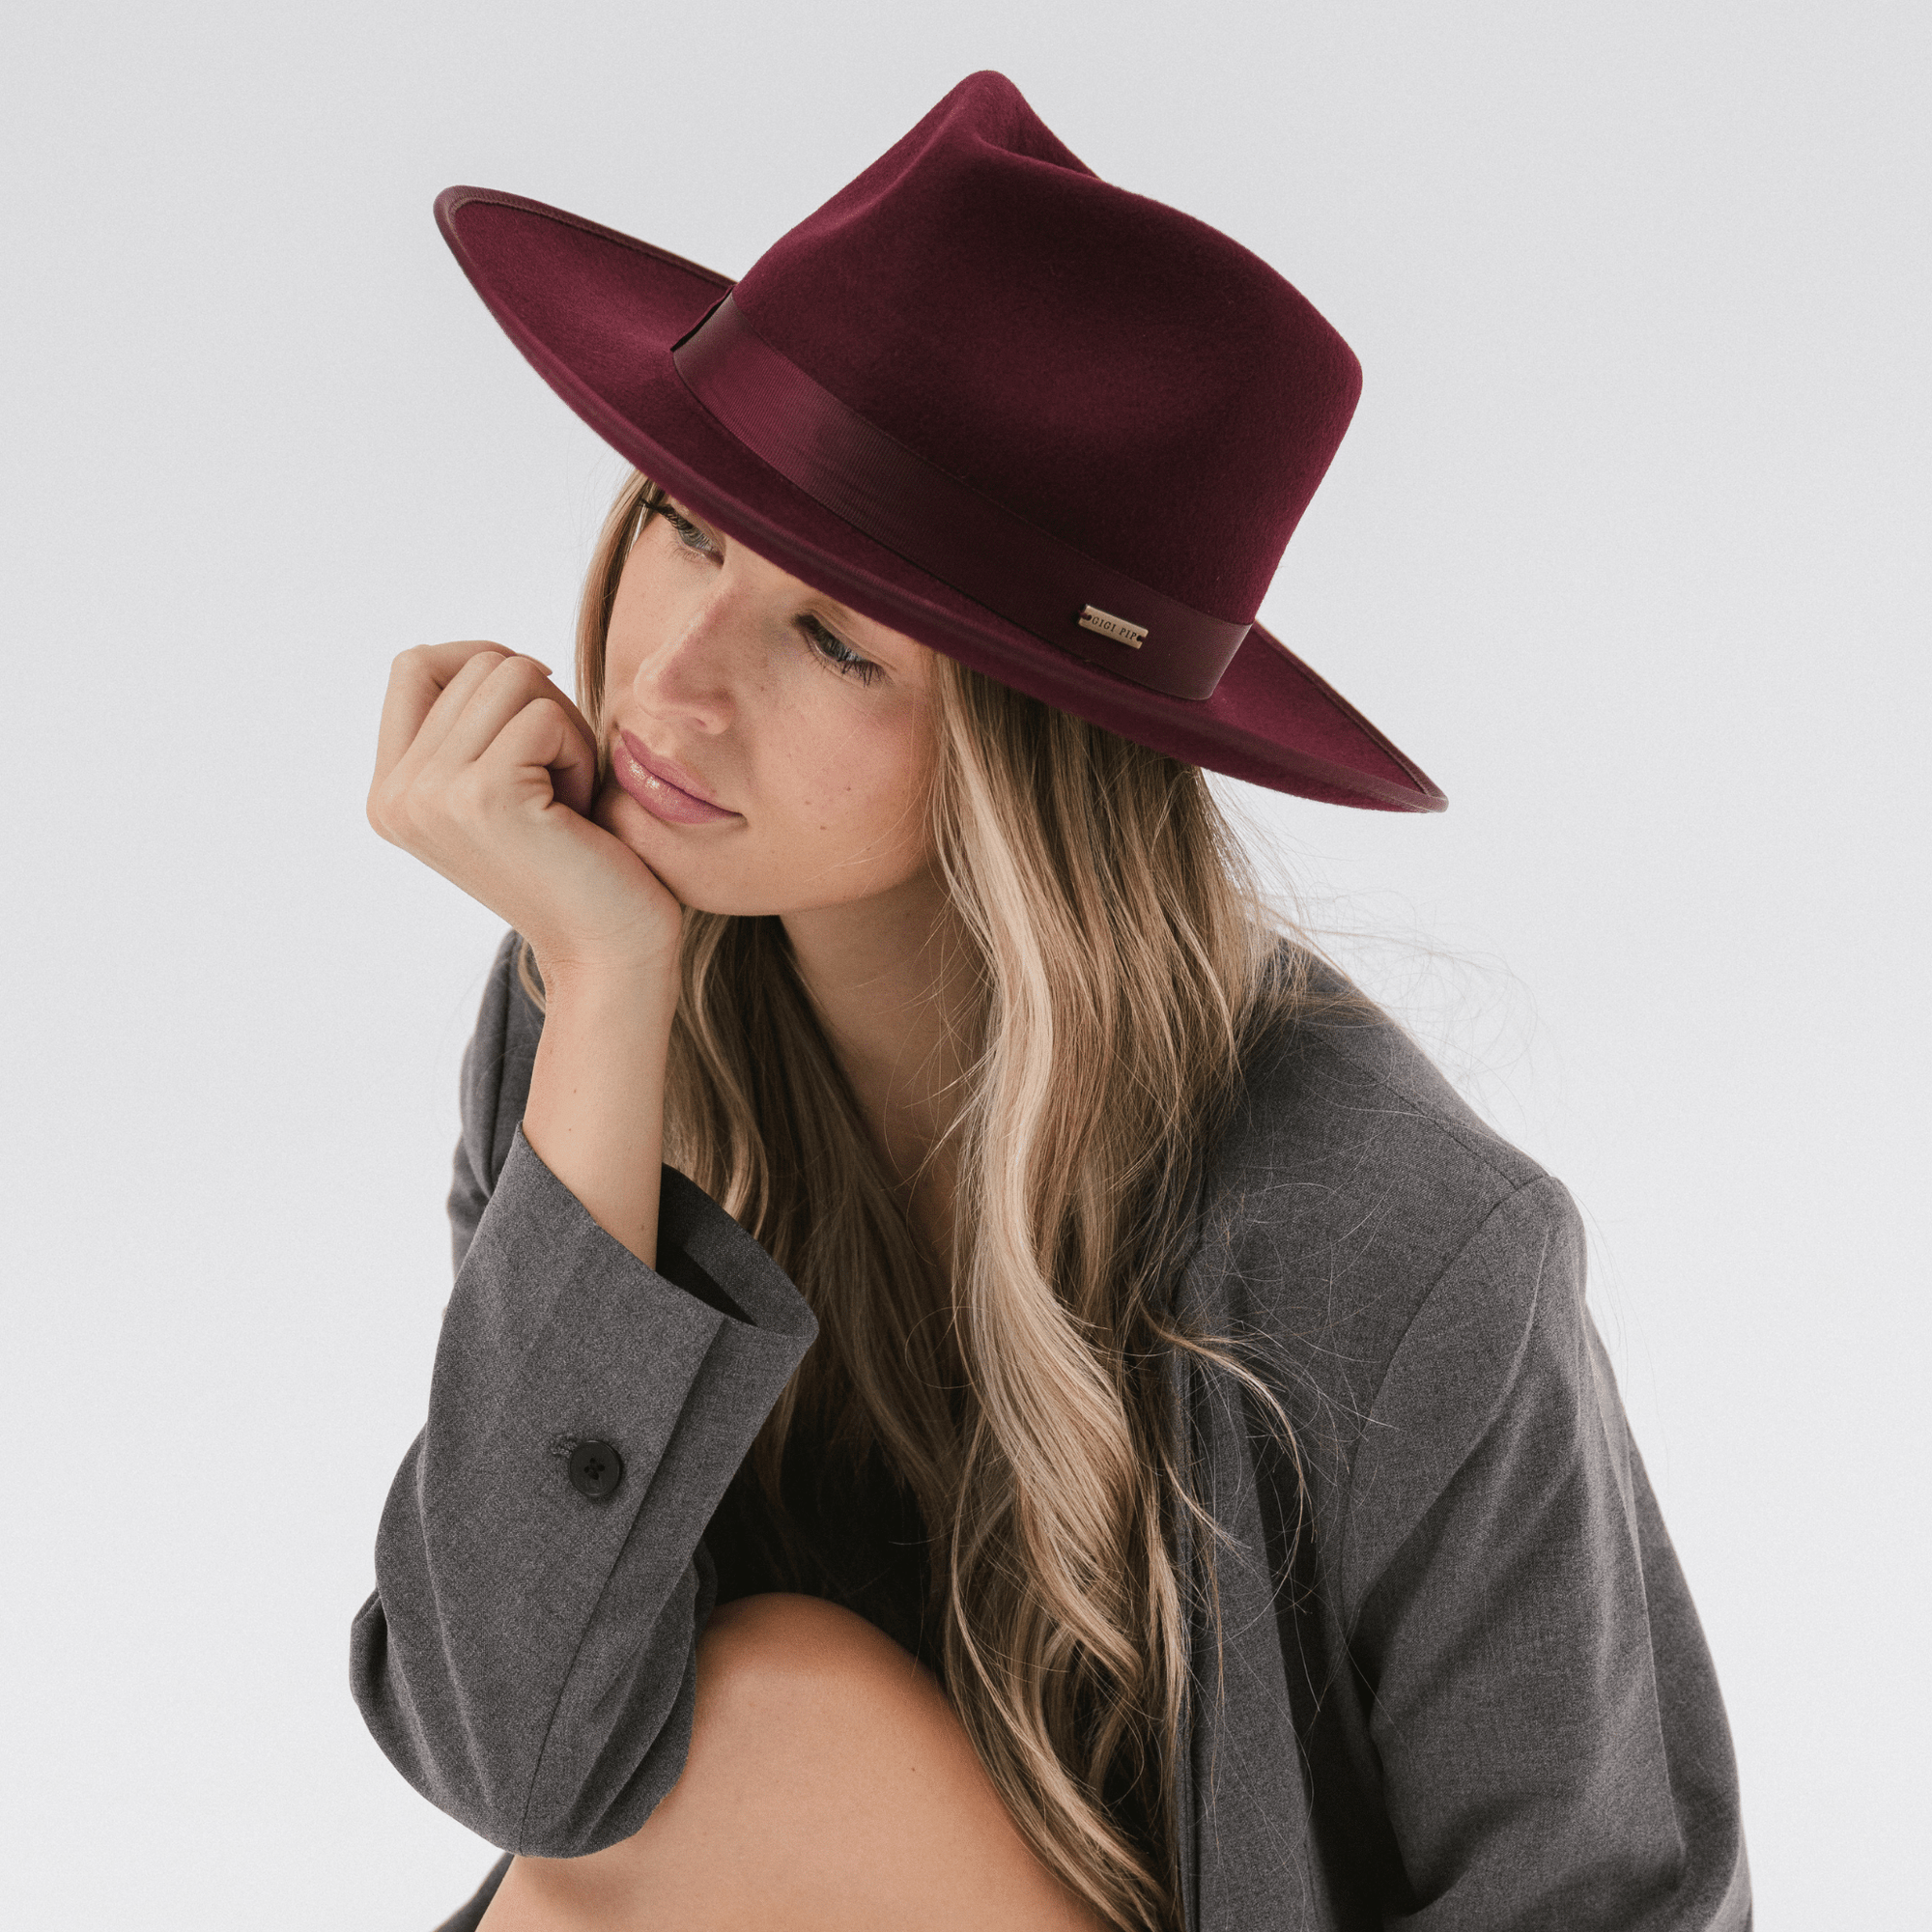 Gigi Pip felt hats for women - Monroe Rancher - fedora teardrop crown with stiff, upturned brim adorned with a tonal grosgrain band on the crown and brim [navy]